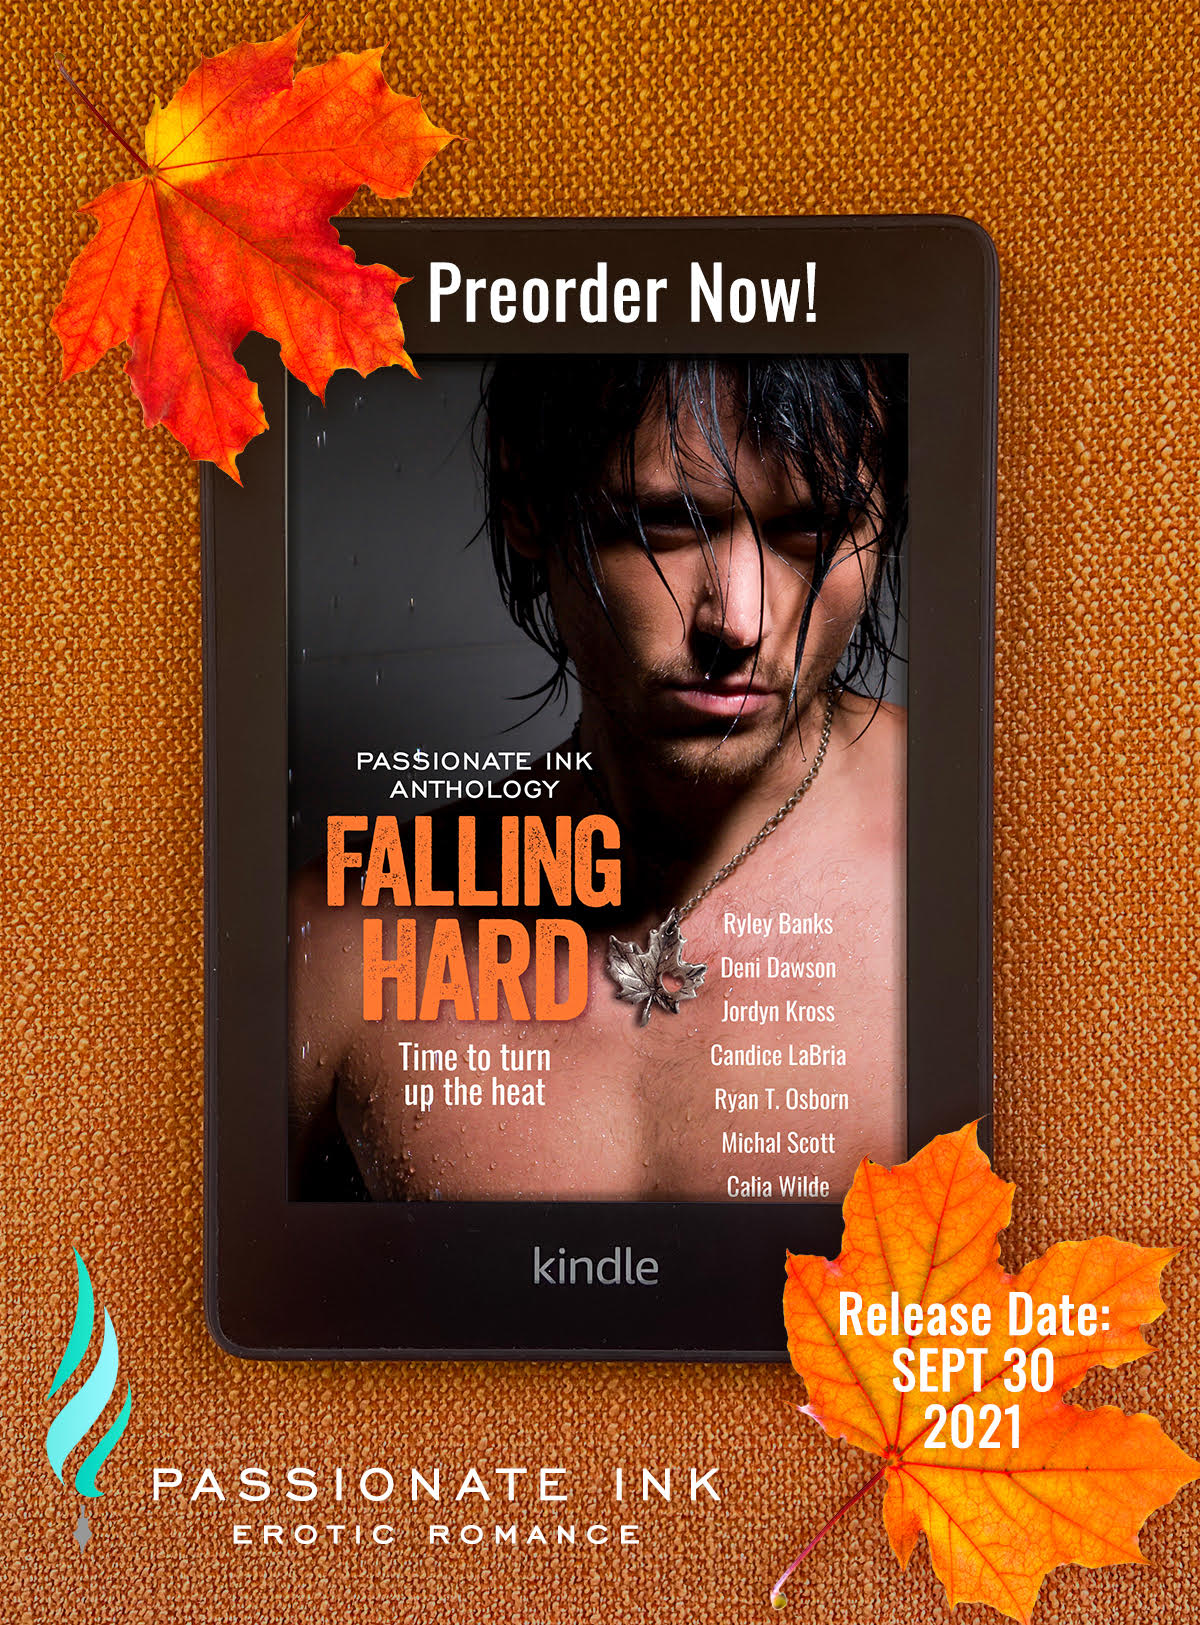 cover reveal of "Falling Hard" 2021 Passionate Ink Charity Anthology